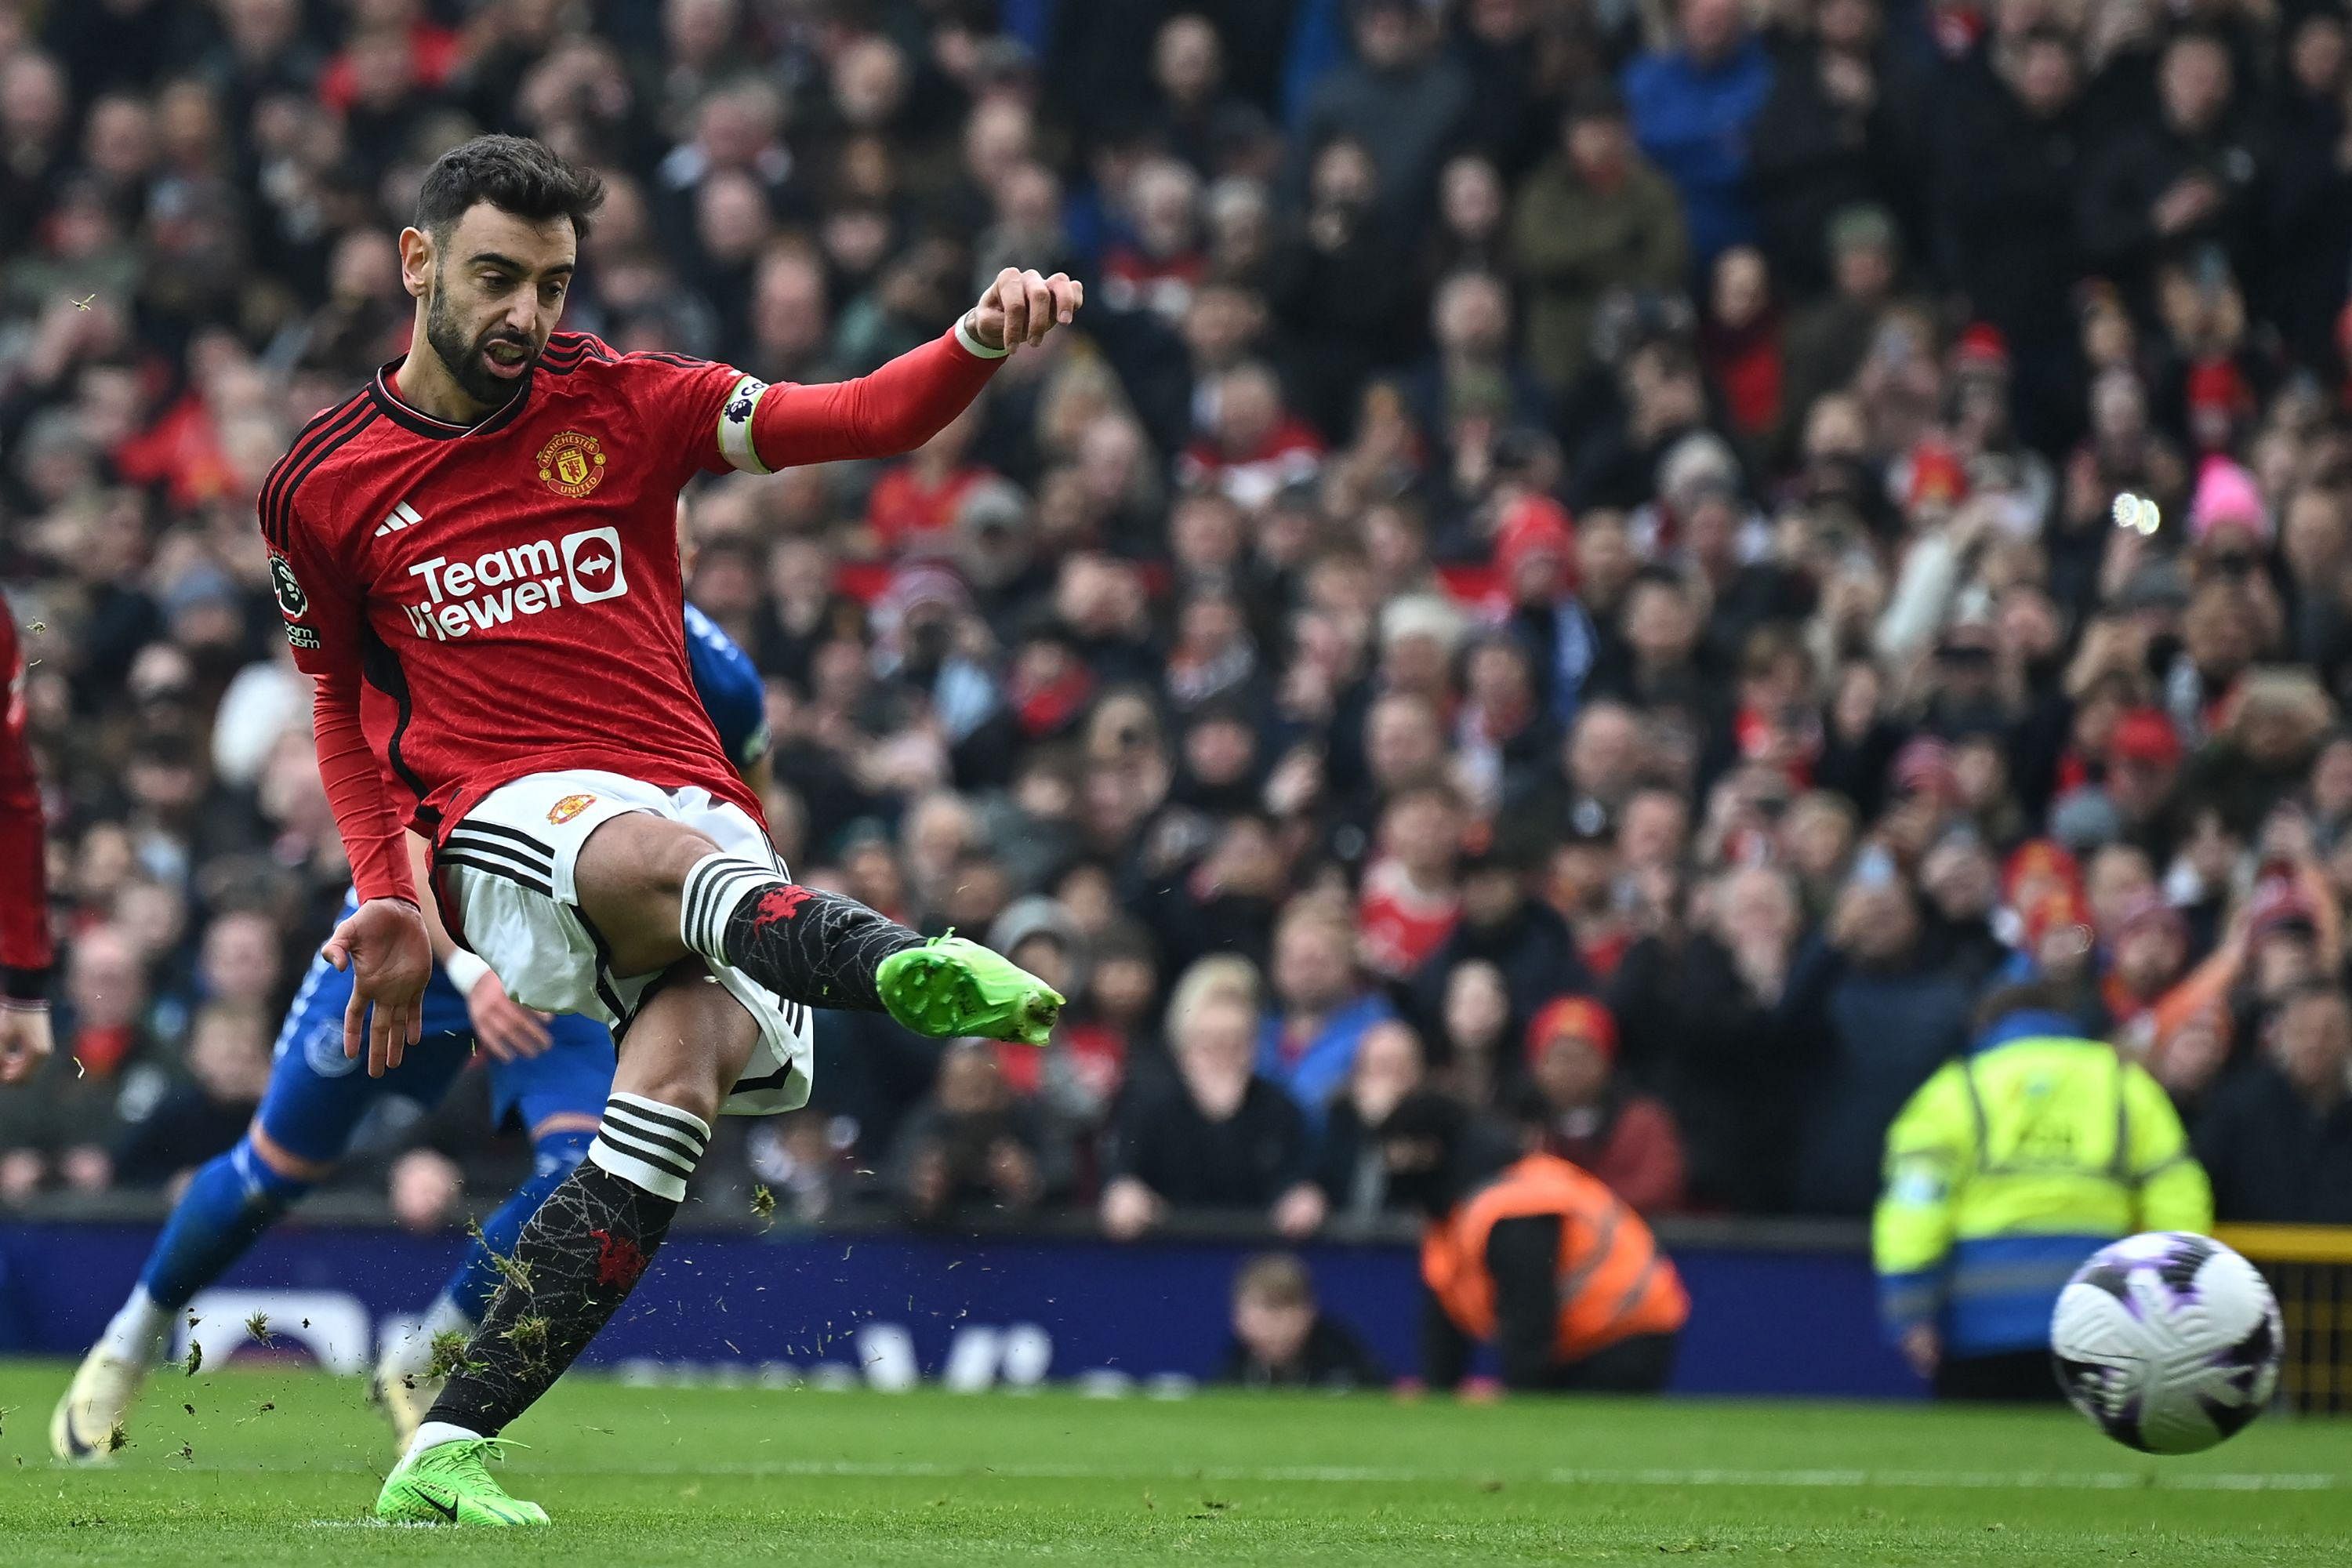 Man United bounce back against Everton thanks to two penalties